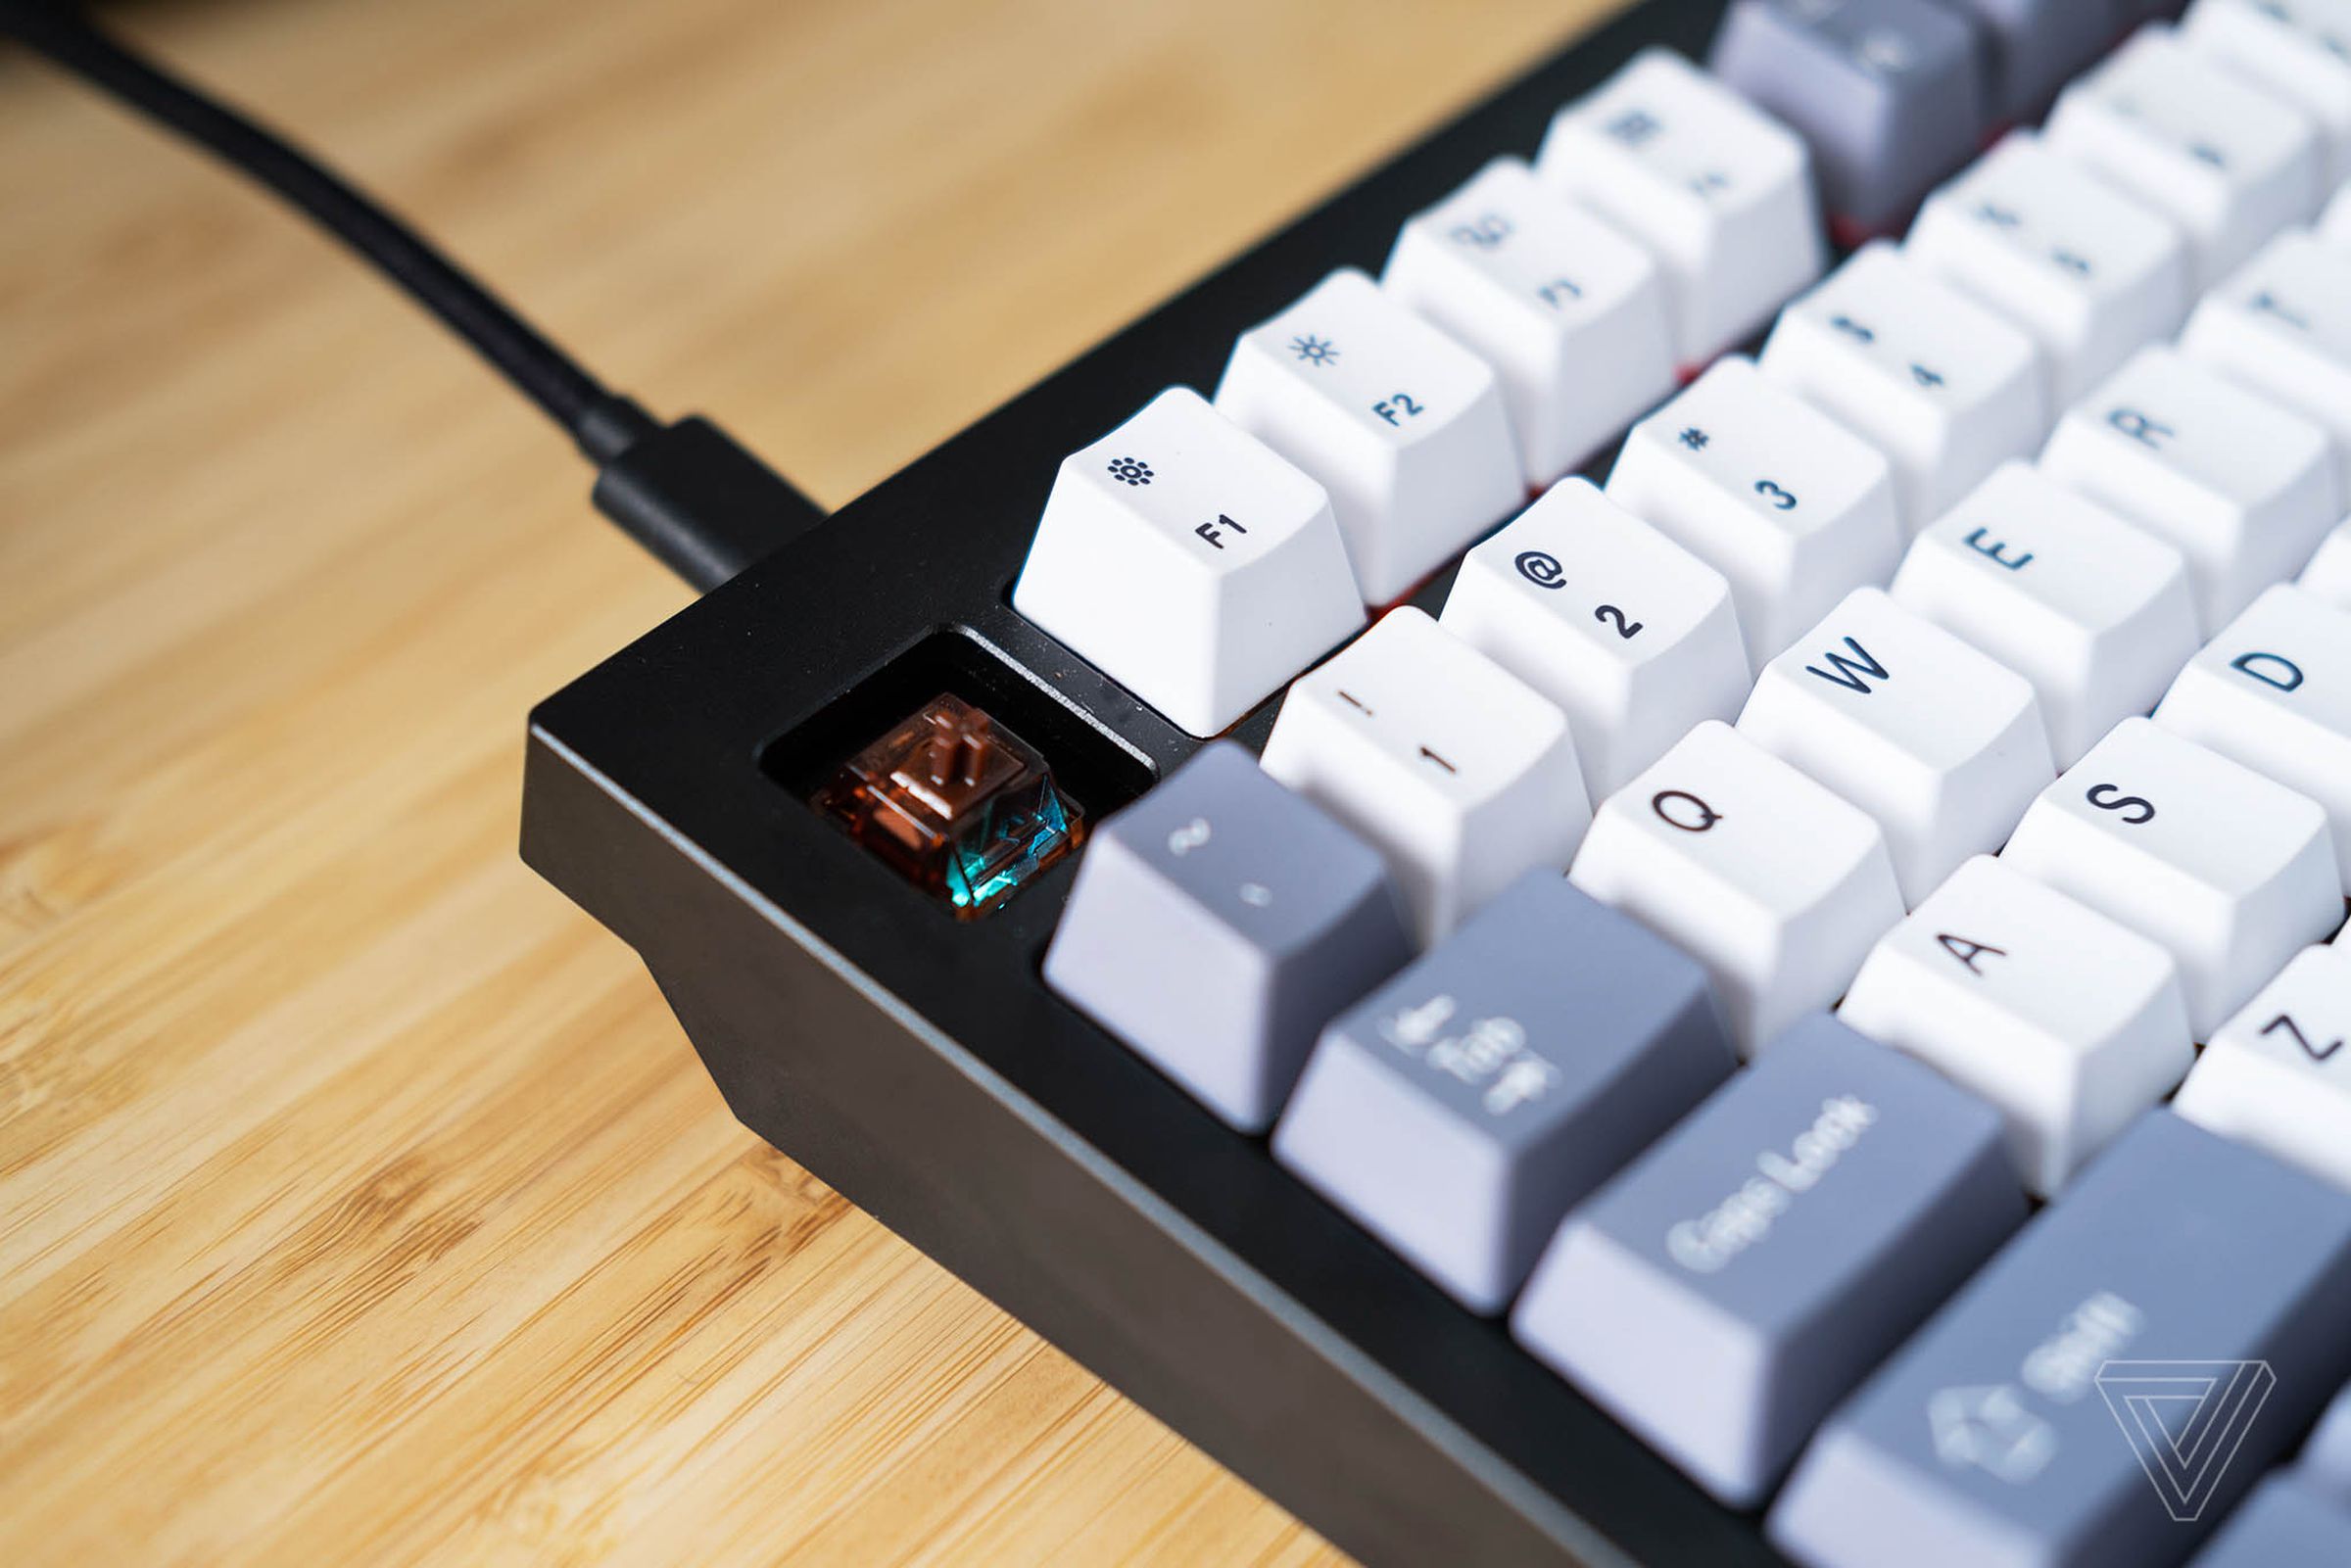 The keyboard technically comes with RGB switches...